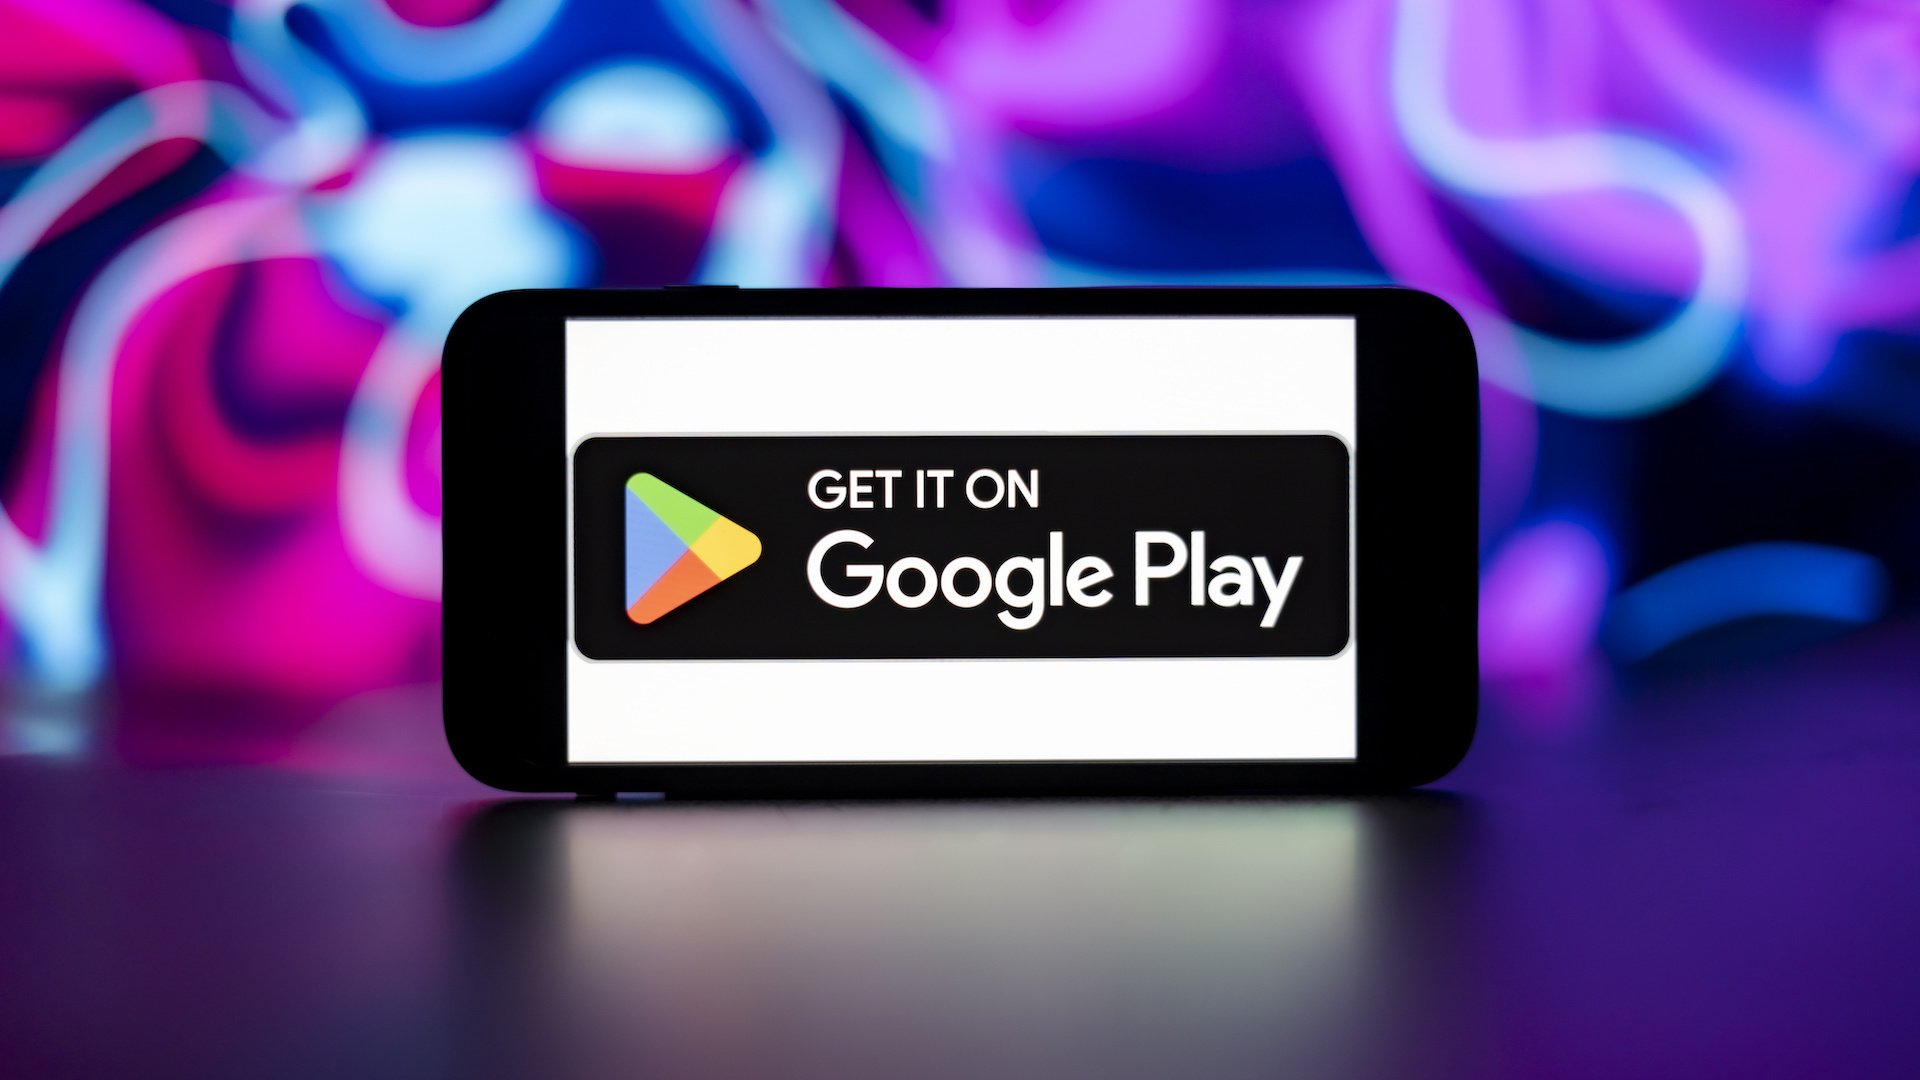 Google play store logo is seen displayed on a mobile phone screen.